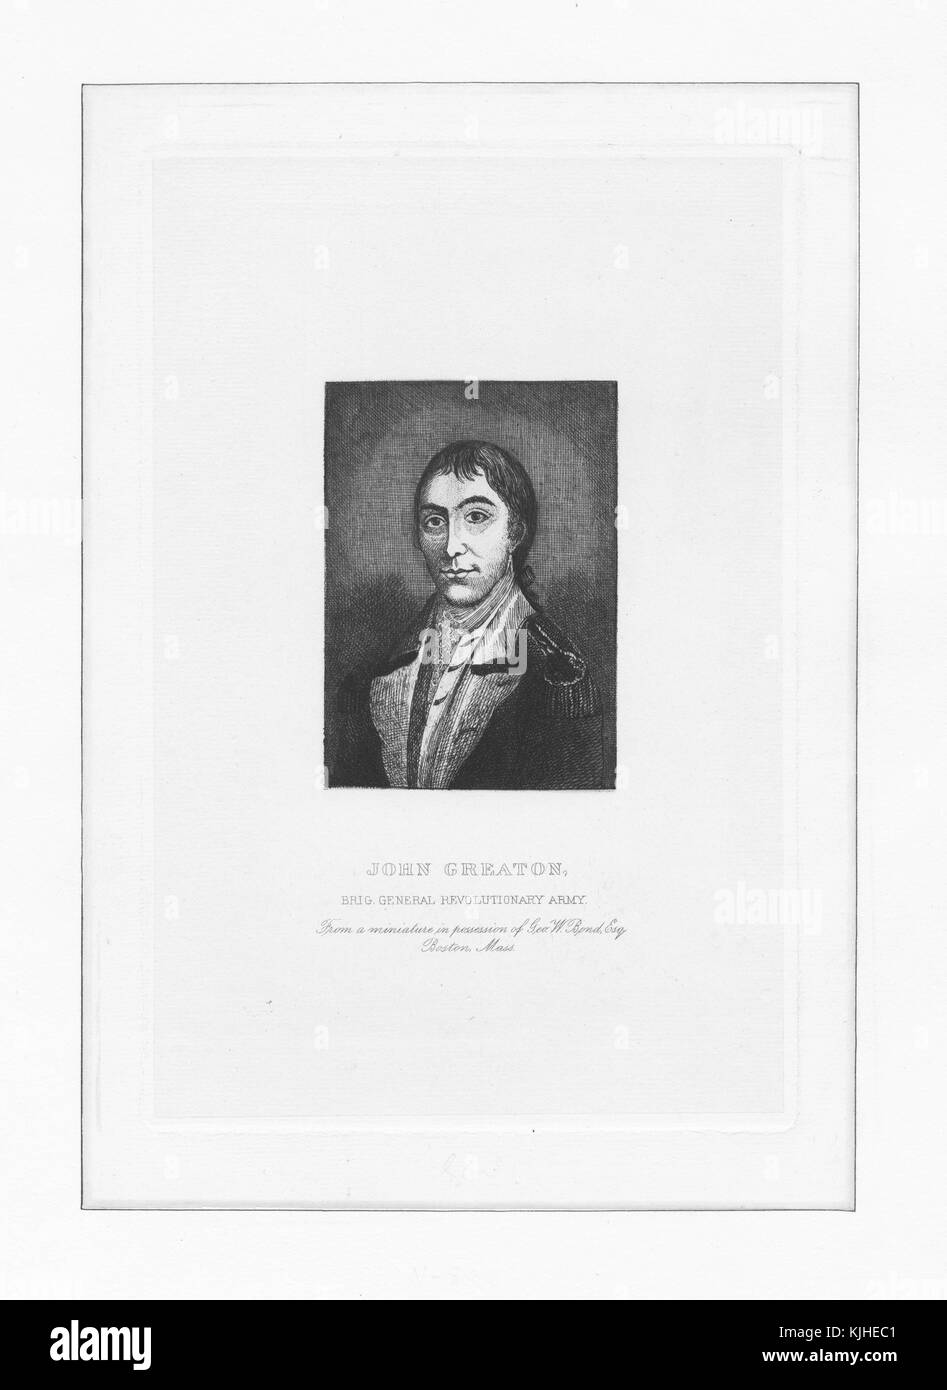 Etched portrait of John Greaton, promoted to the rank of colonel on July 1, 1775, served in the Siege of Boston, and was designated the 24th Continental Regiment in the 1776 establishment, captioned 'John Greaton, Brigadier General Revolutionary Army, From a miniature in possession of Geo W Bond, Esq, Boston, Massachusets', 1800. From the New York Public Library. Stock Photo